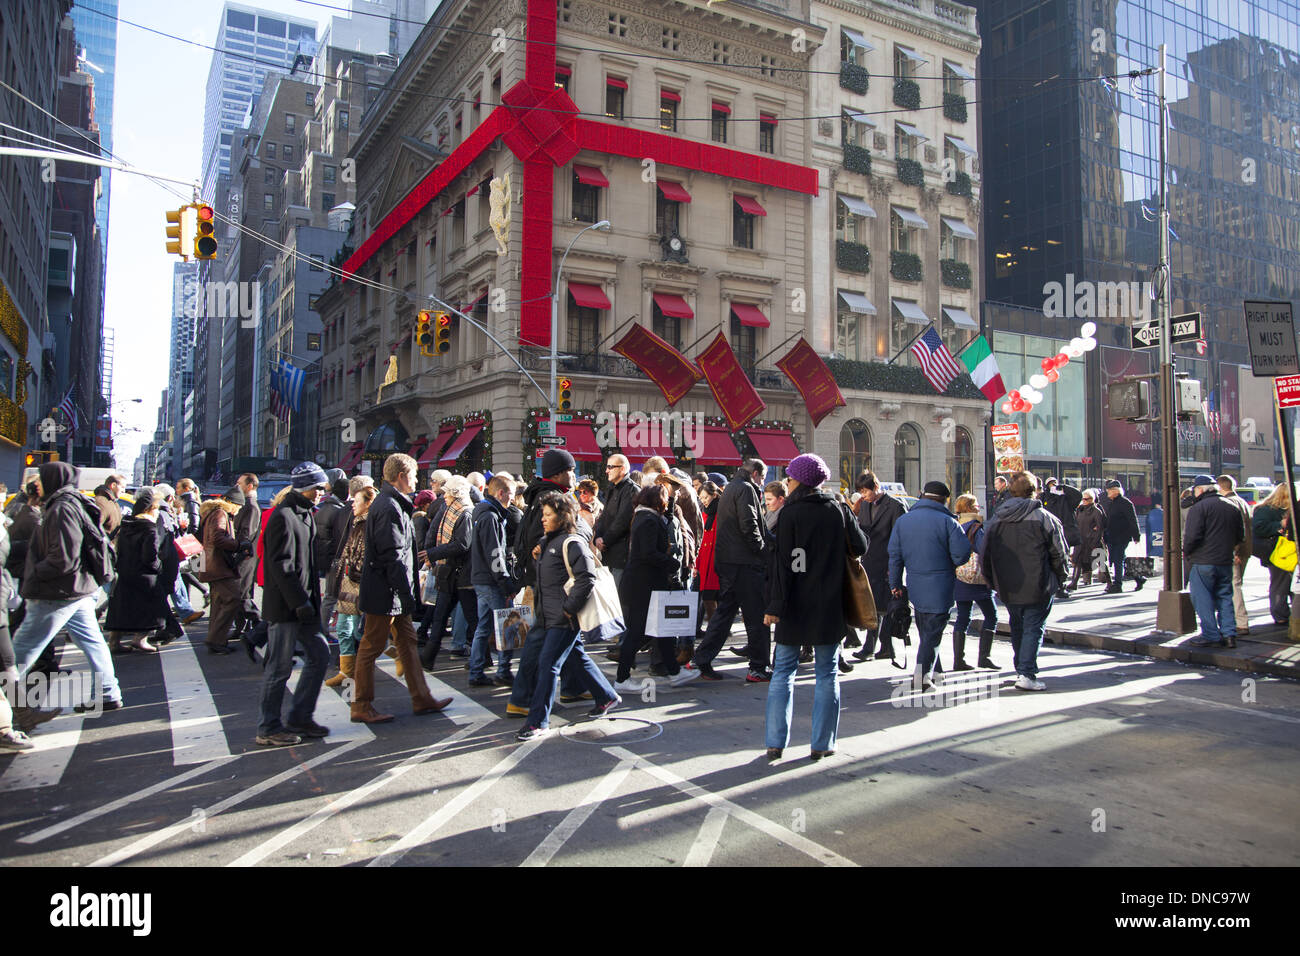 Crowds of people shop along 5th avenue during the holiday season. (Cartier in its Christmas best in the background.) Stock Photo